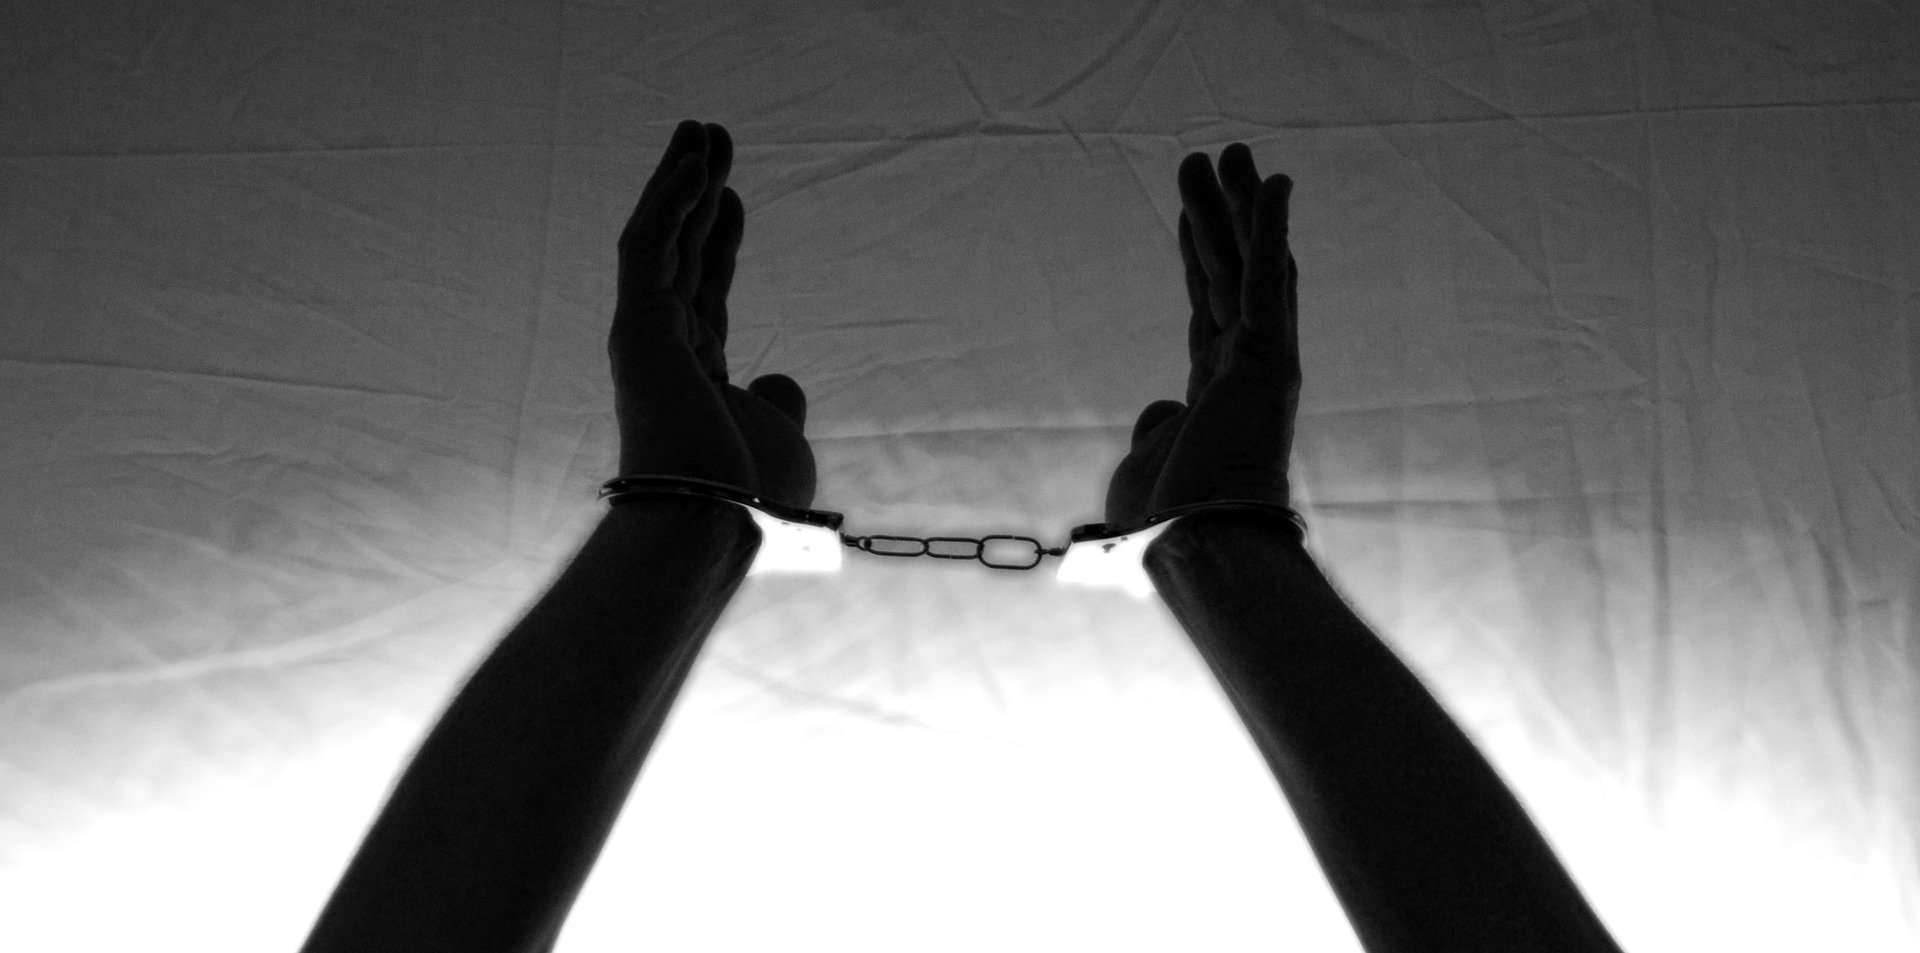 A person's hands and forearms are shown in black and white, lifted high. The wrist's are handcuffed.